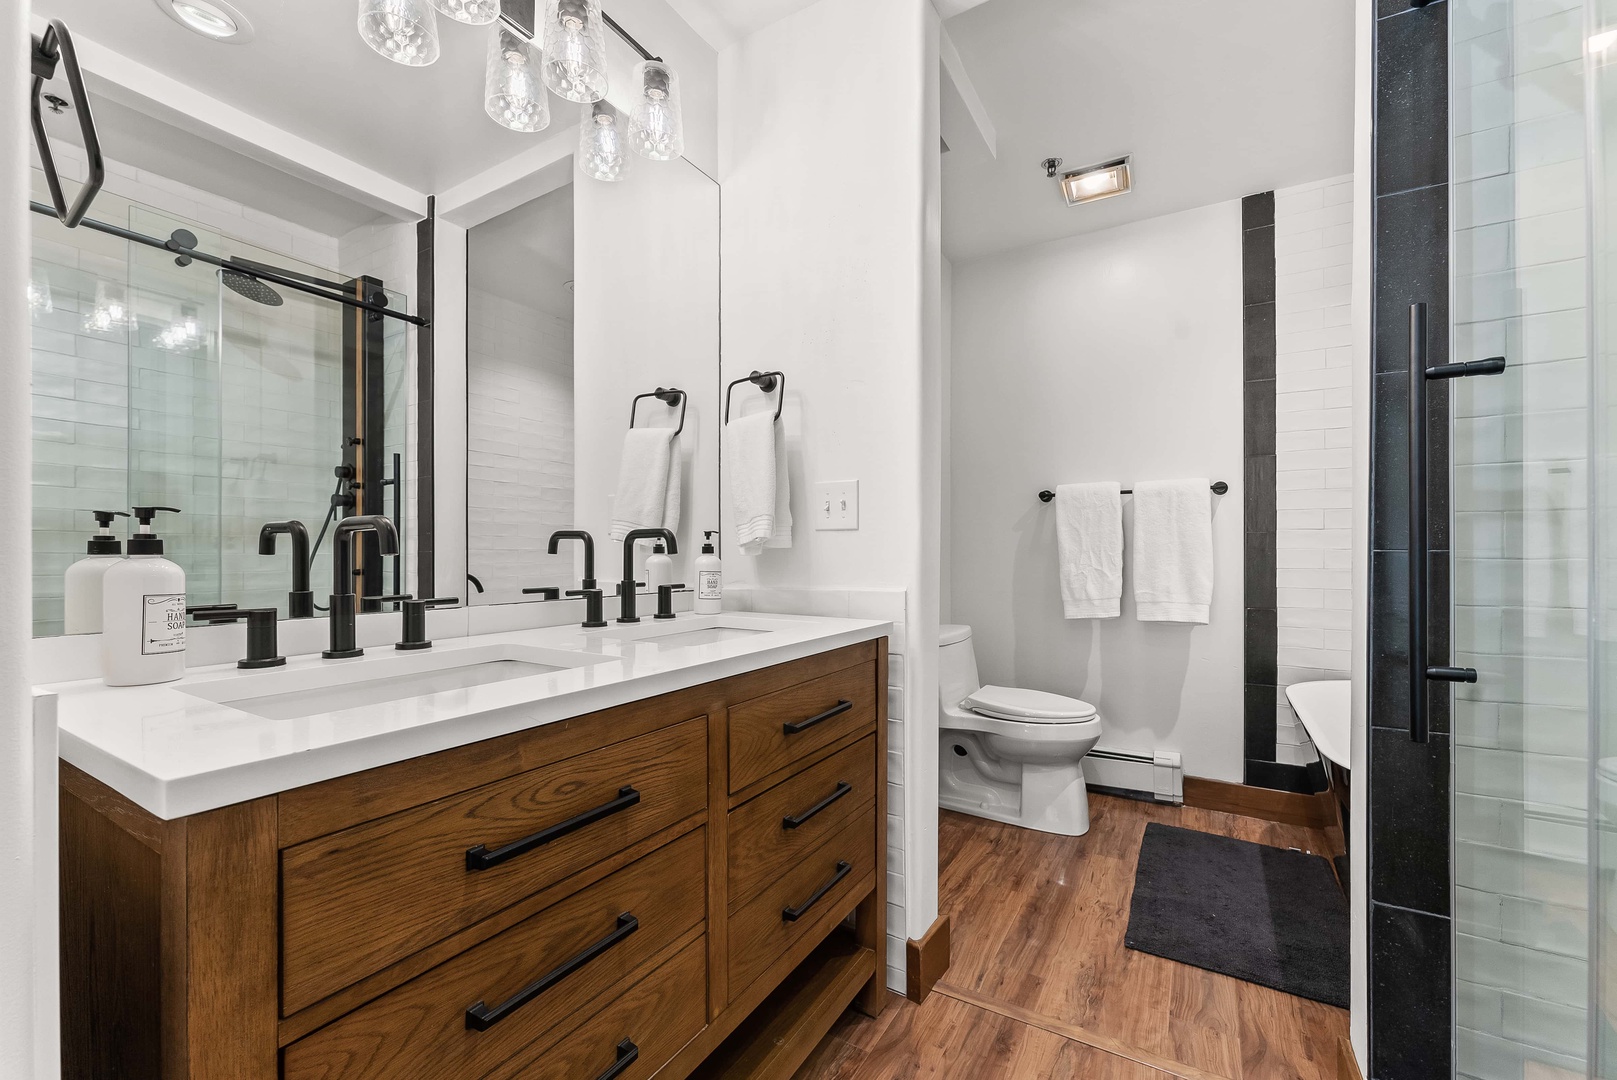 This ensuite bath offers a dual vanity, glass shower, & soaking tub